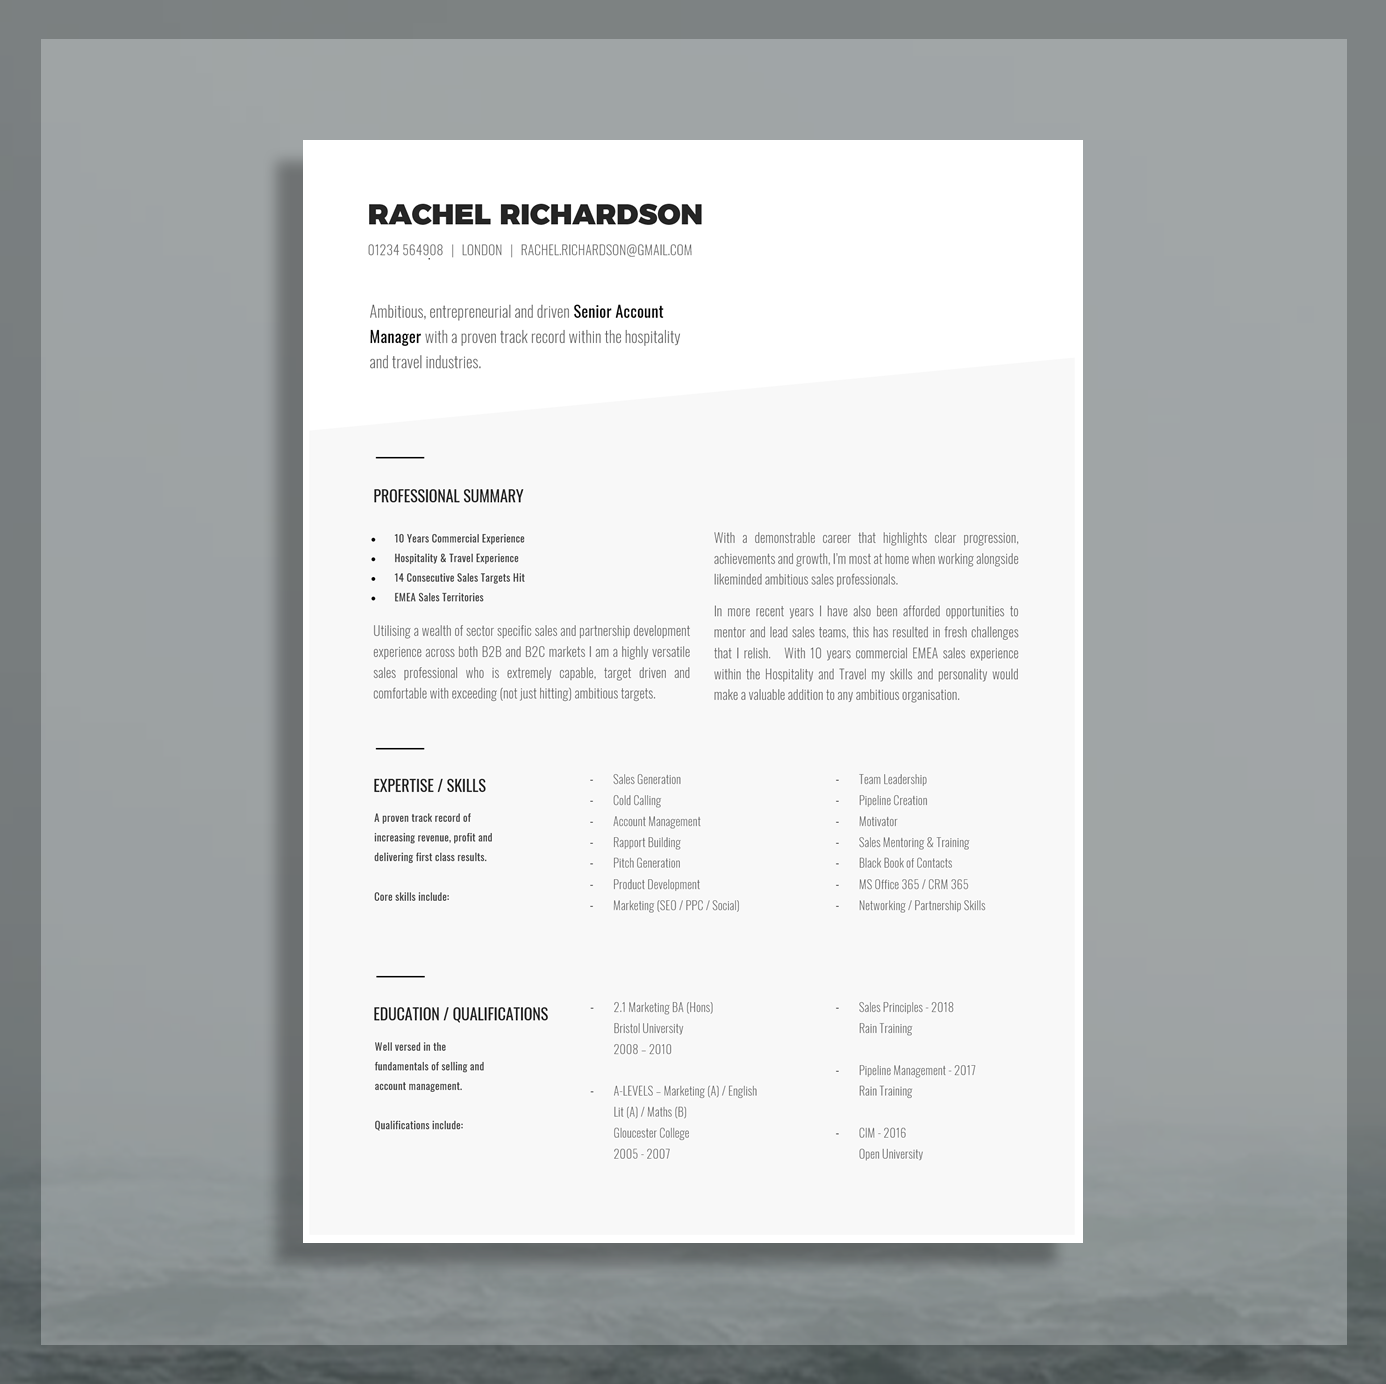 Resume Template for Sales or Client Services Professionals Cover